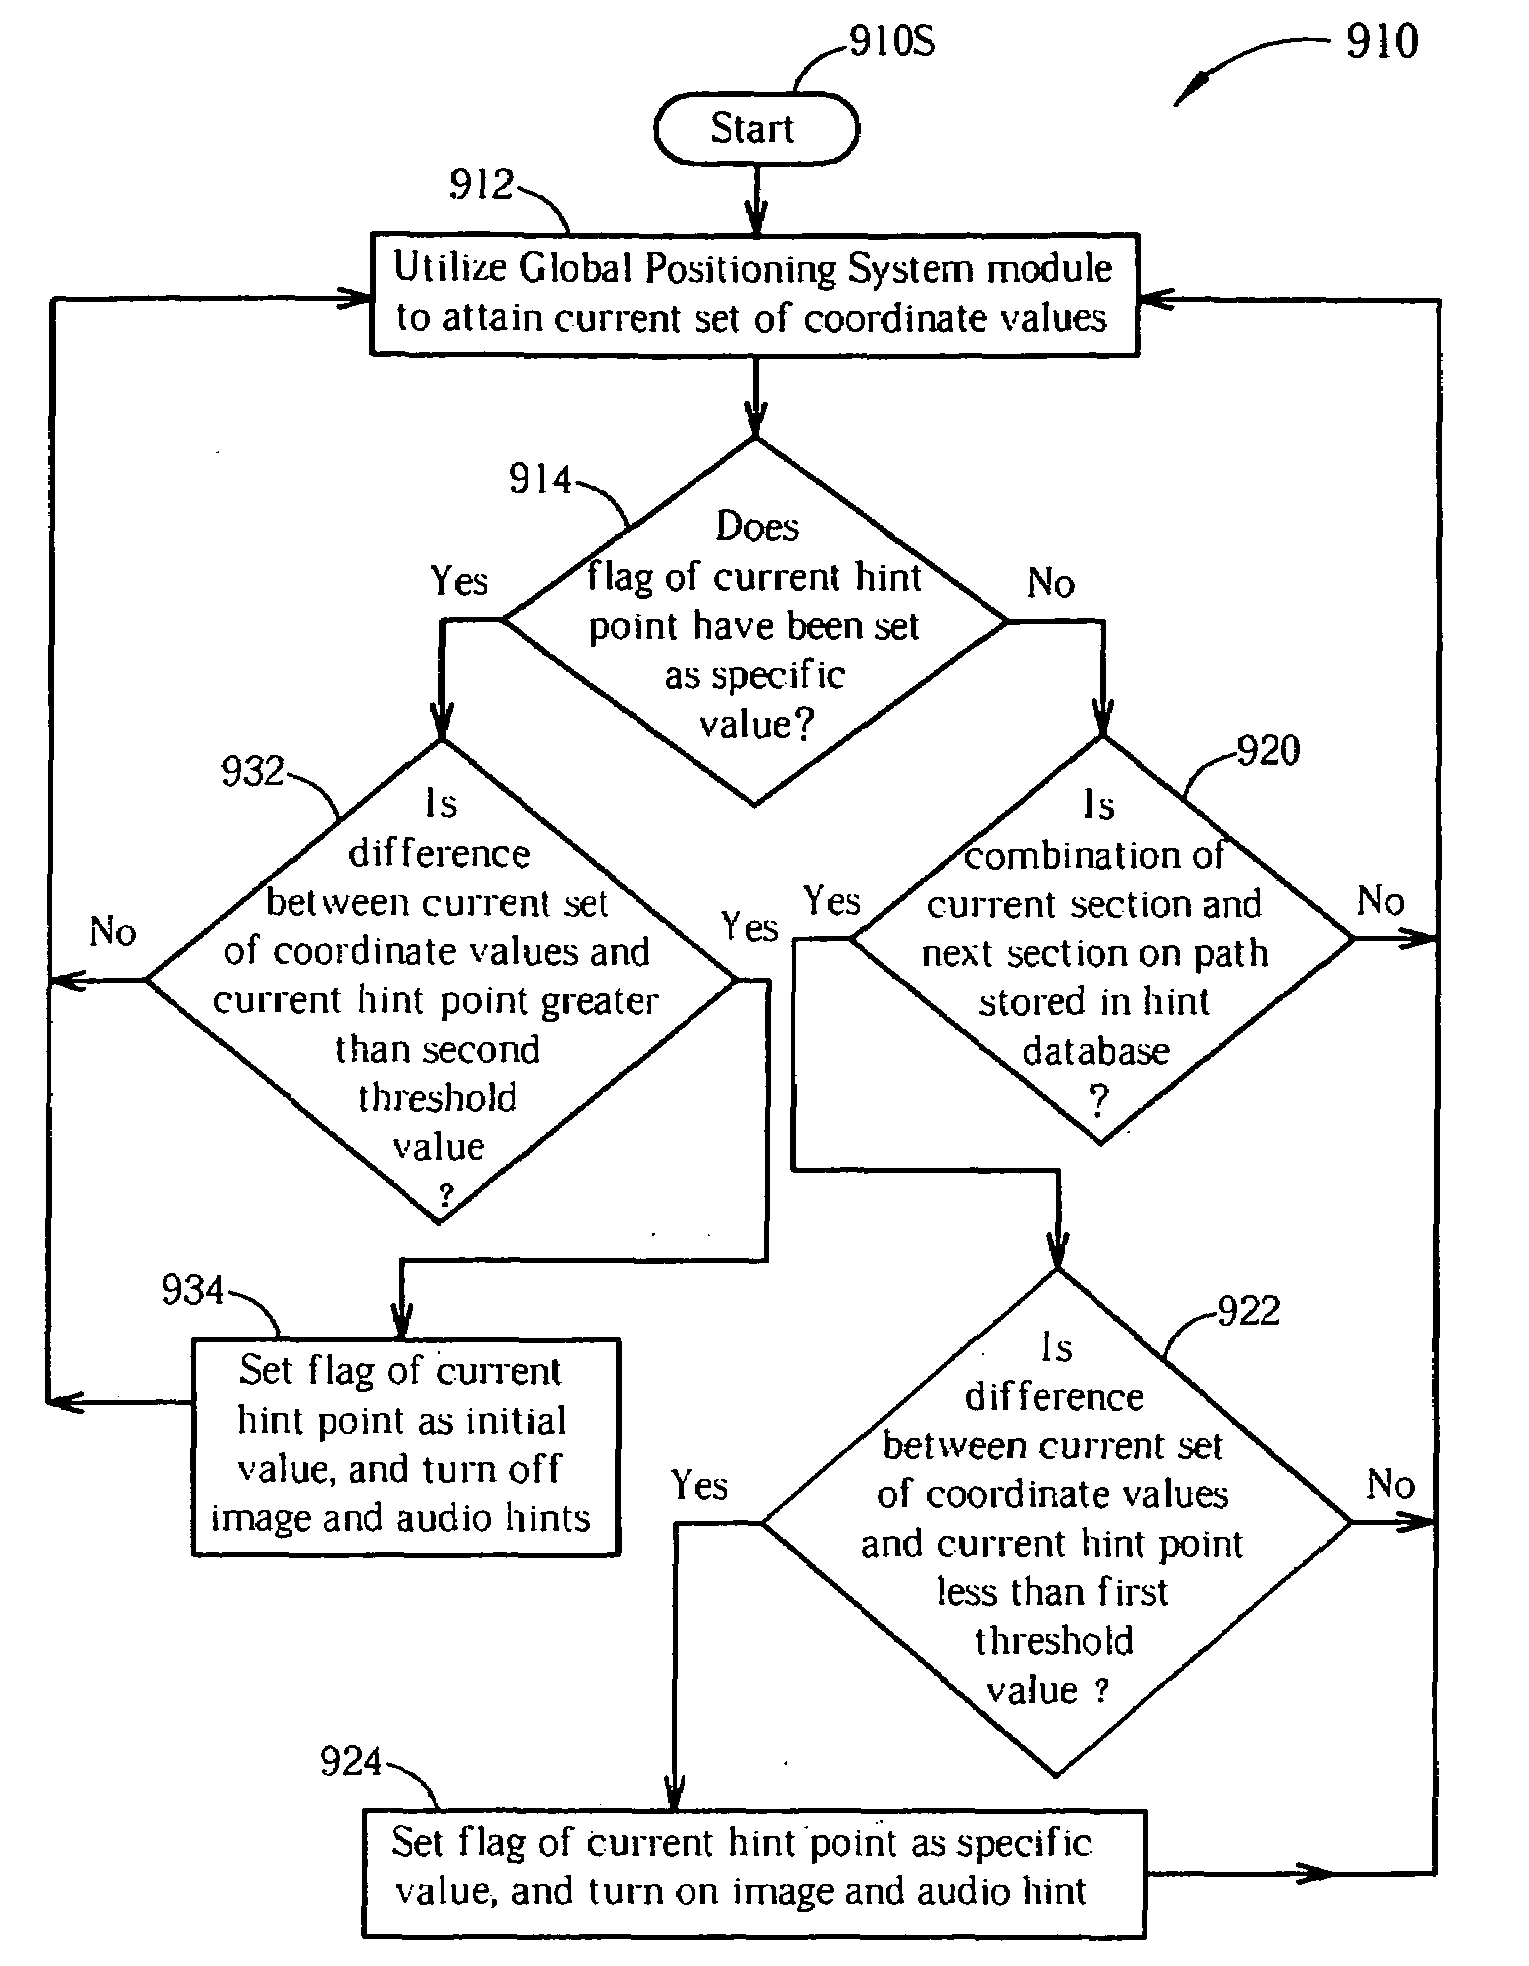 Personal navigation devices and related methods